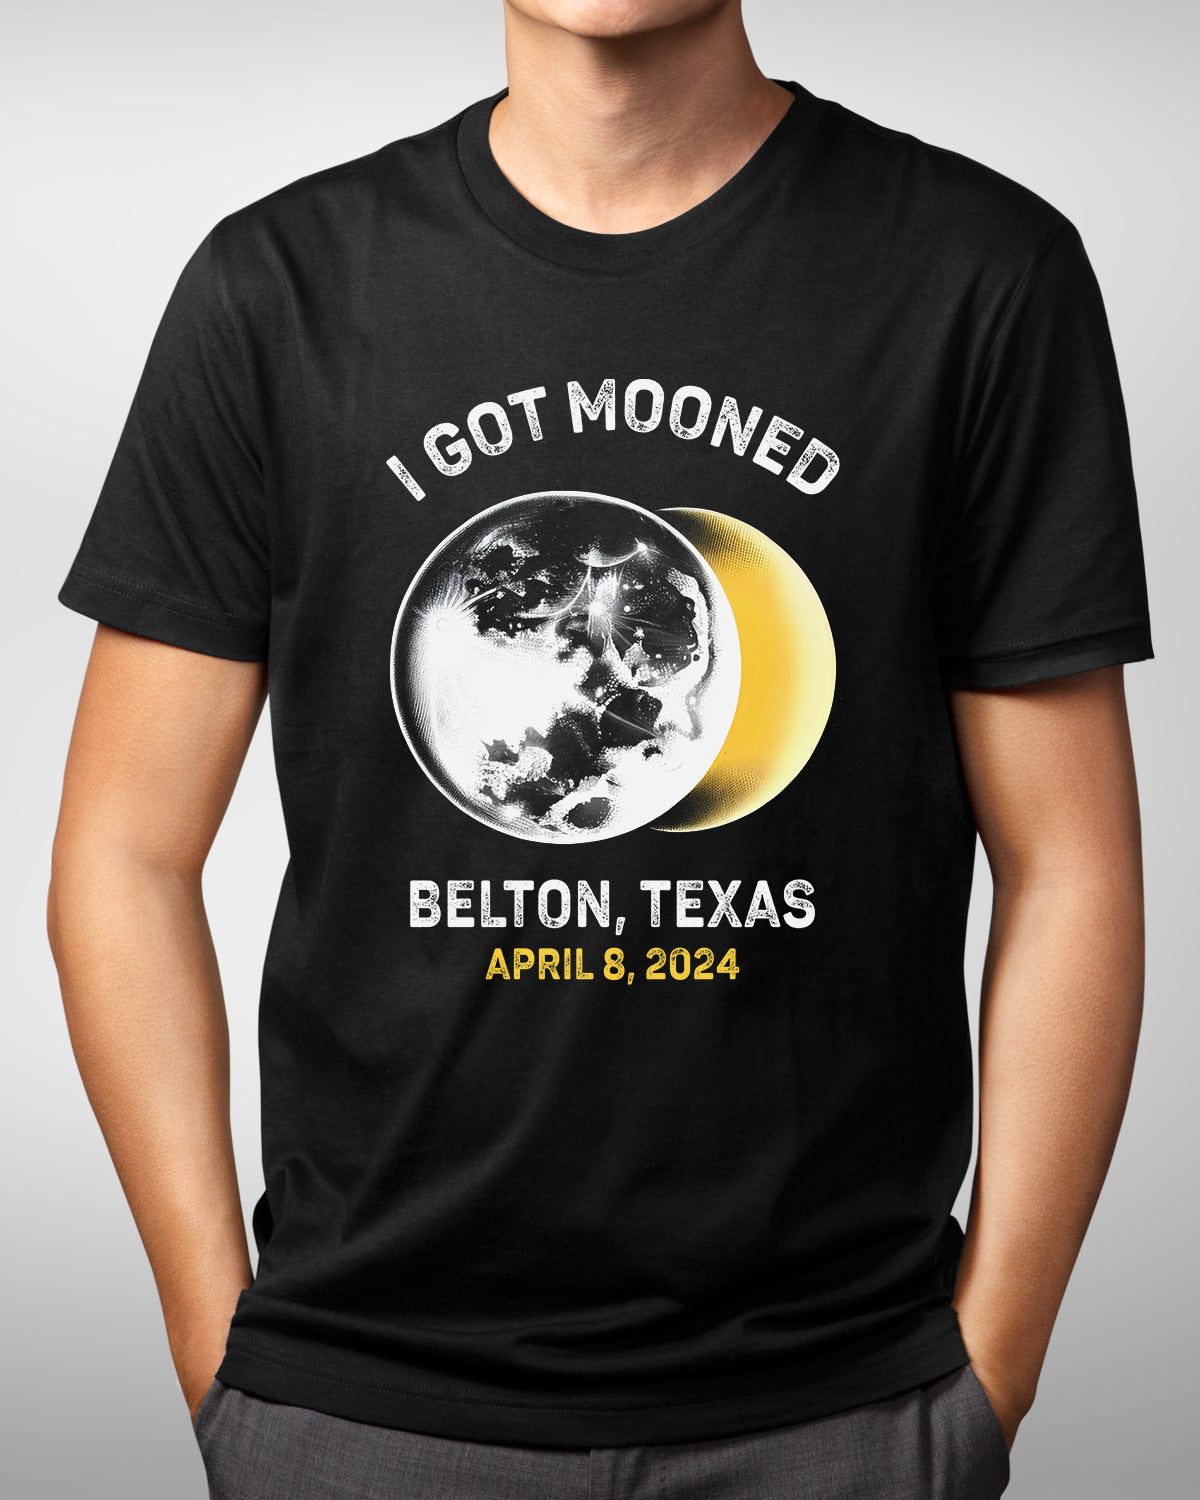 I Got Mooned Spring 2024 Eclipse Shirt, Custom City State Tee, April 8, 2024 Totality Event, Astronomy & Astrology Souvenir